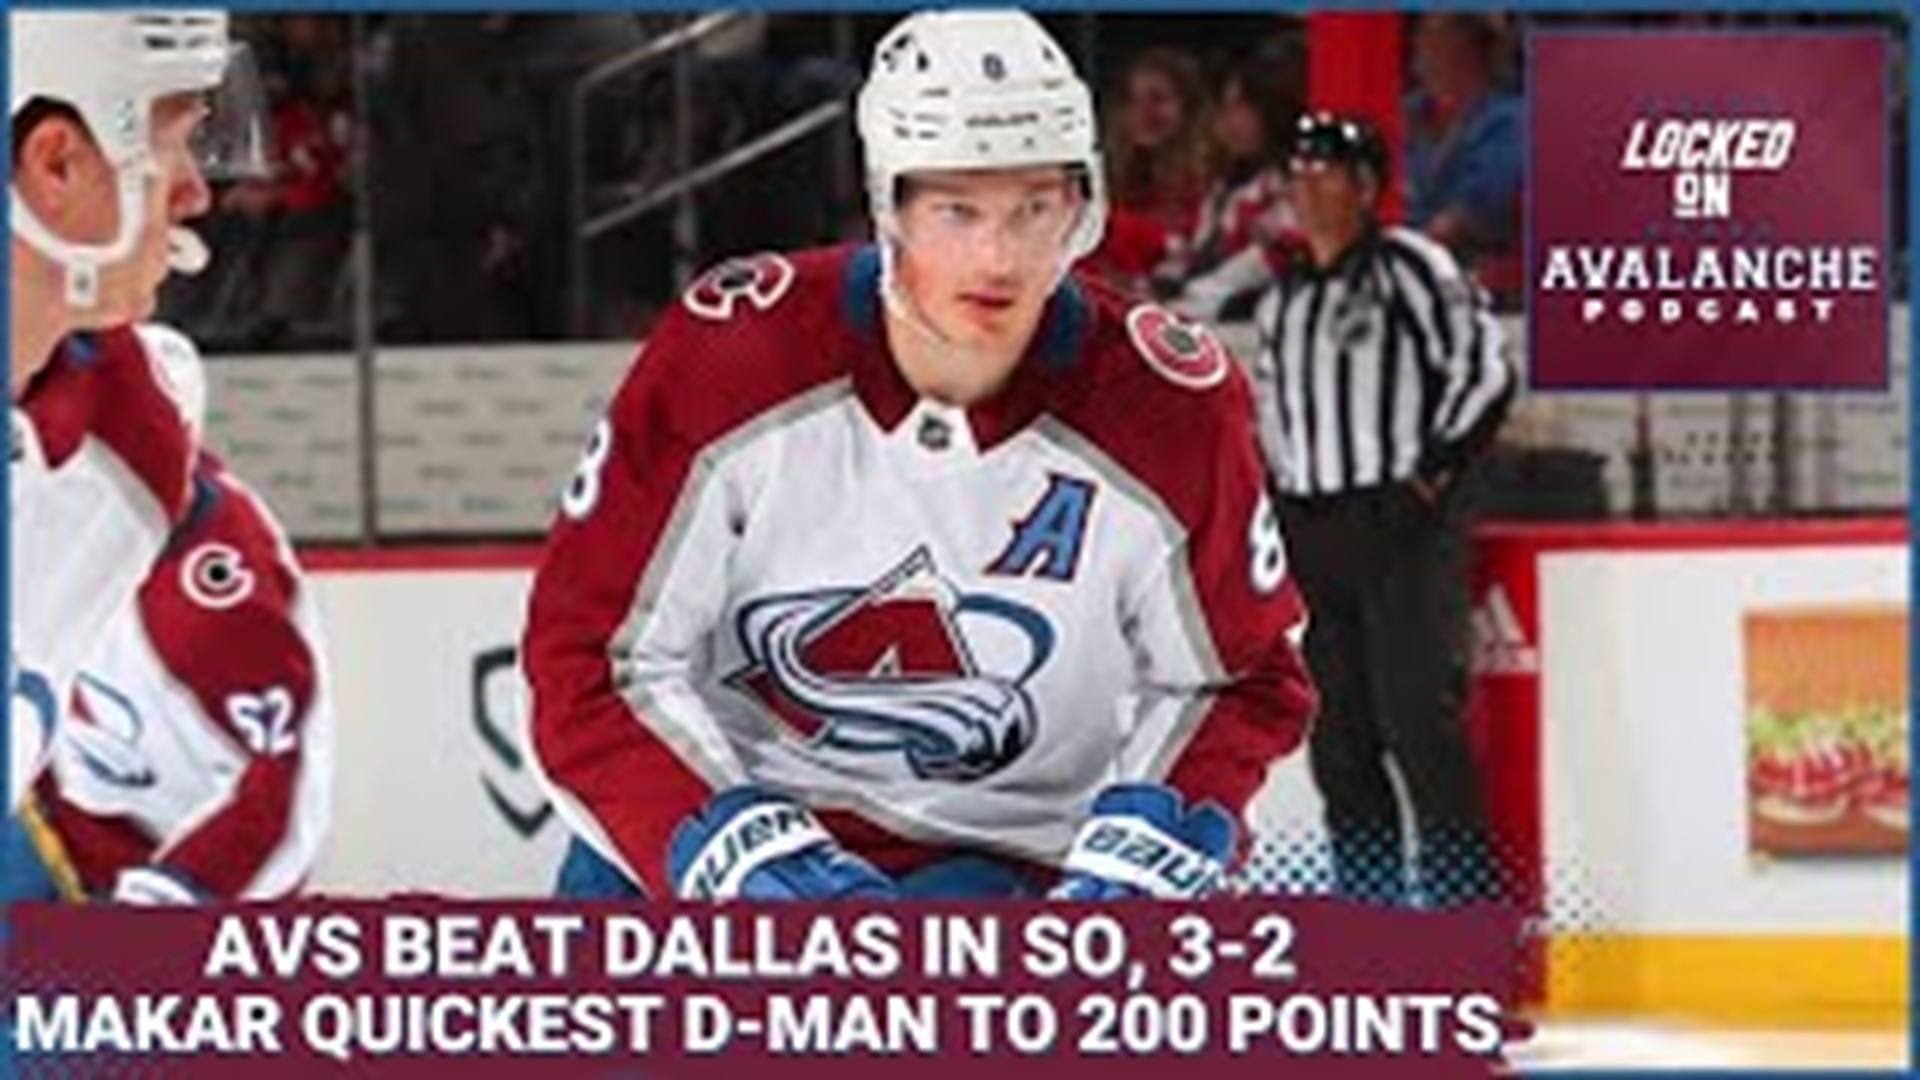 Makar recorded his 200th NHL point in his 195th game Monday night against the Dallas Stars.